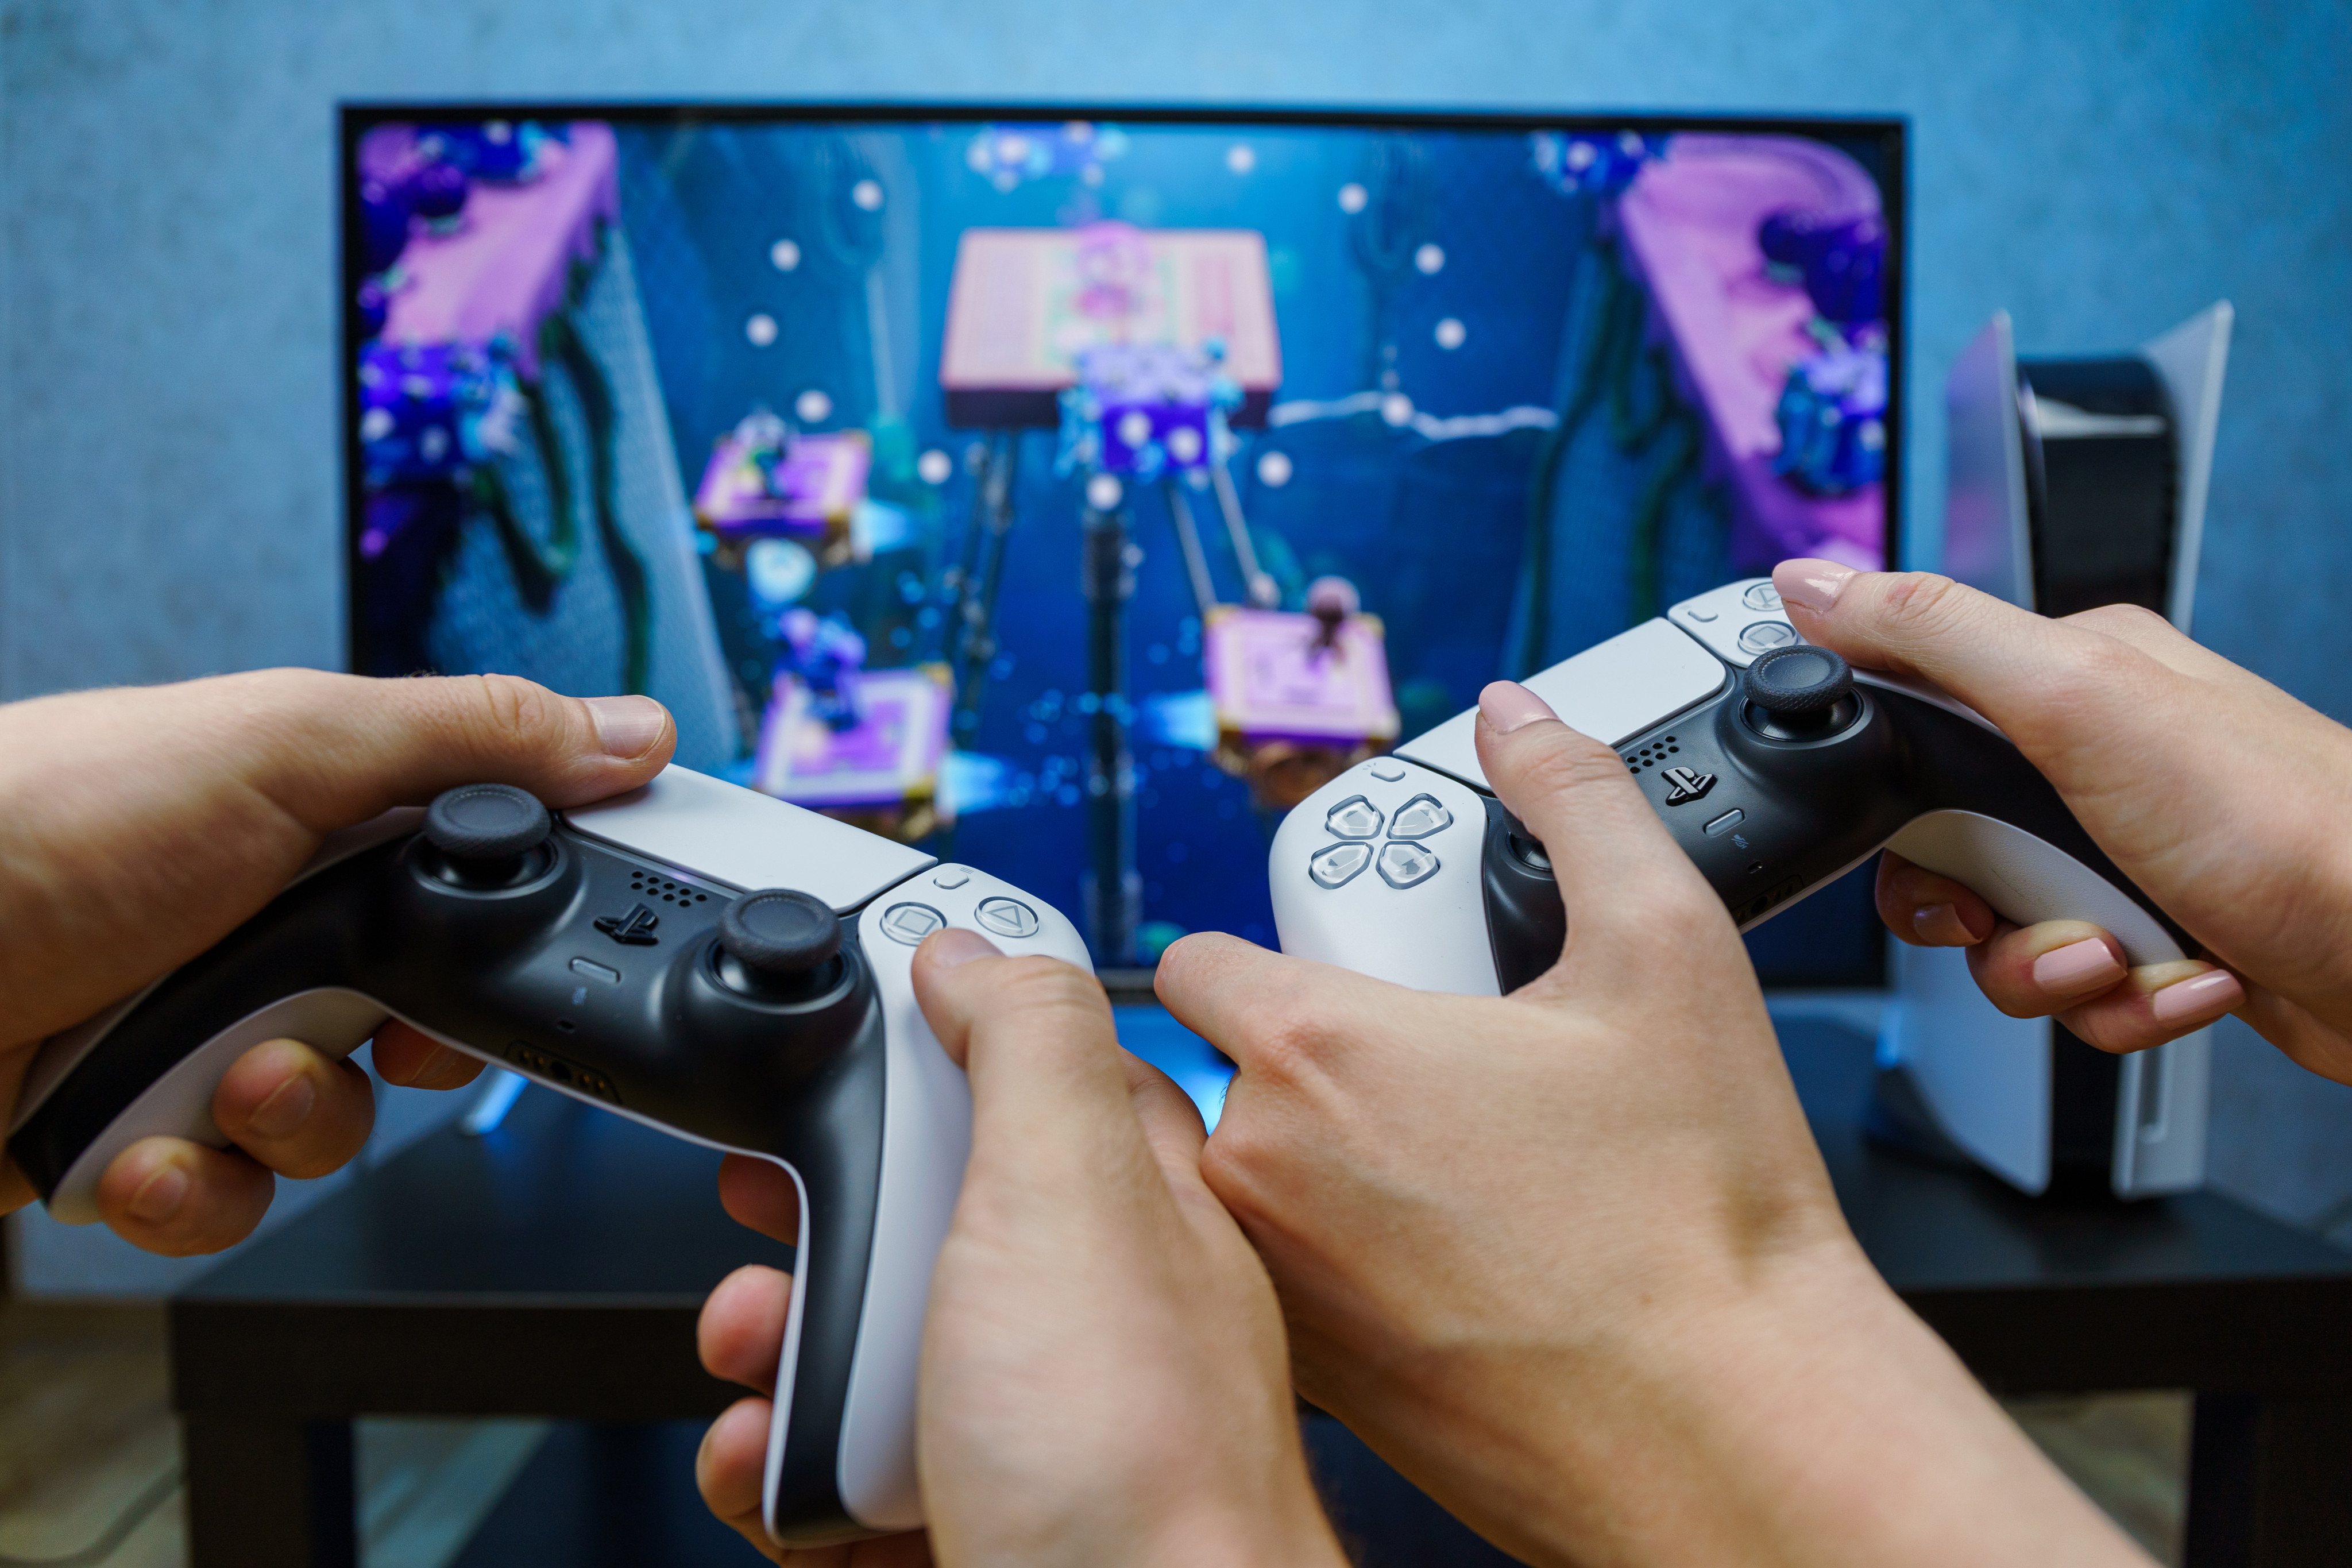 PS5 sales were hampered by supply chain snarls earlier in its life cycle. Photo: Shutterstock